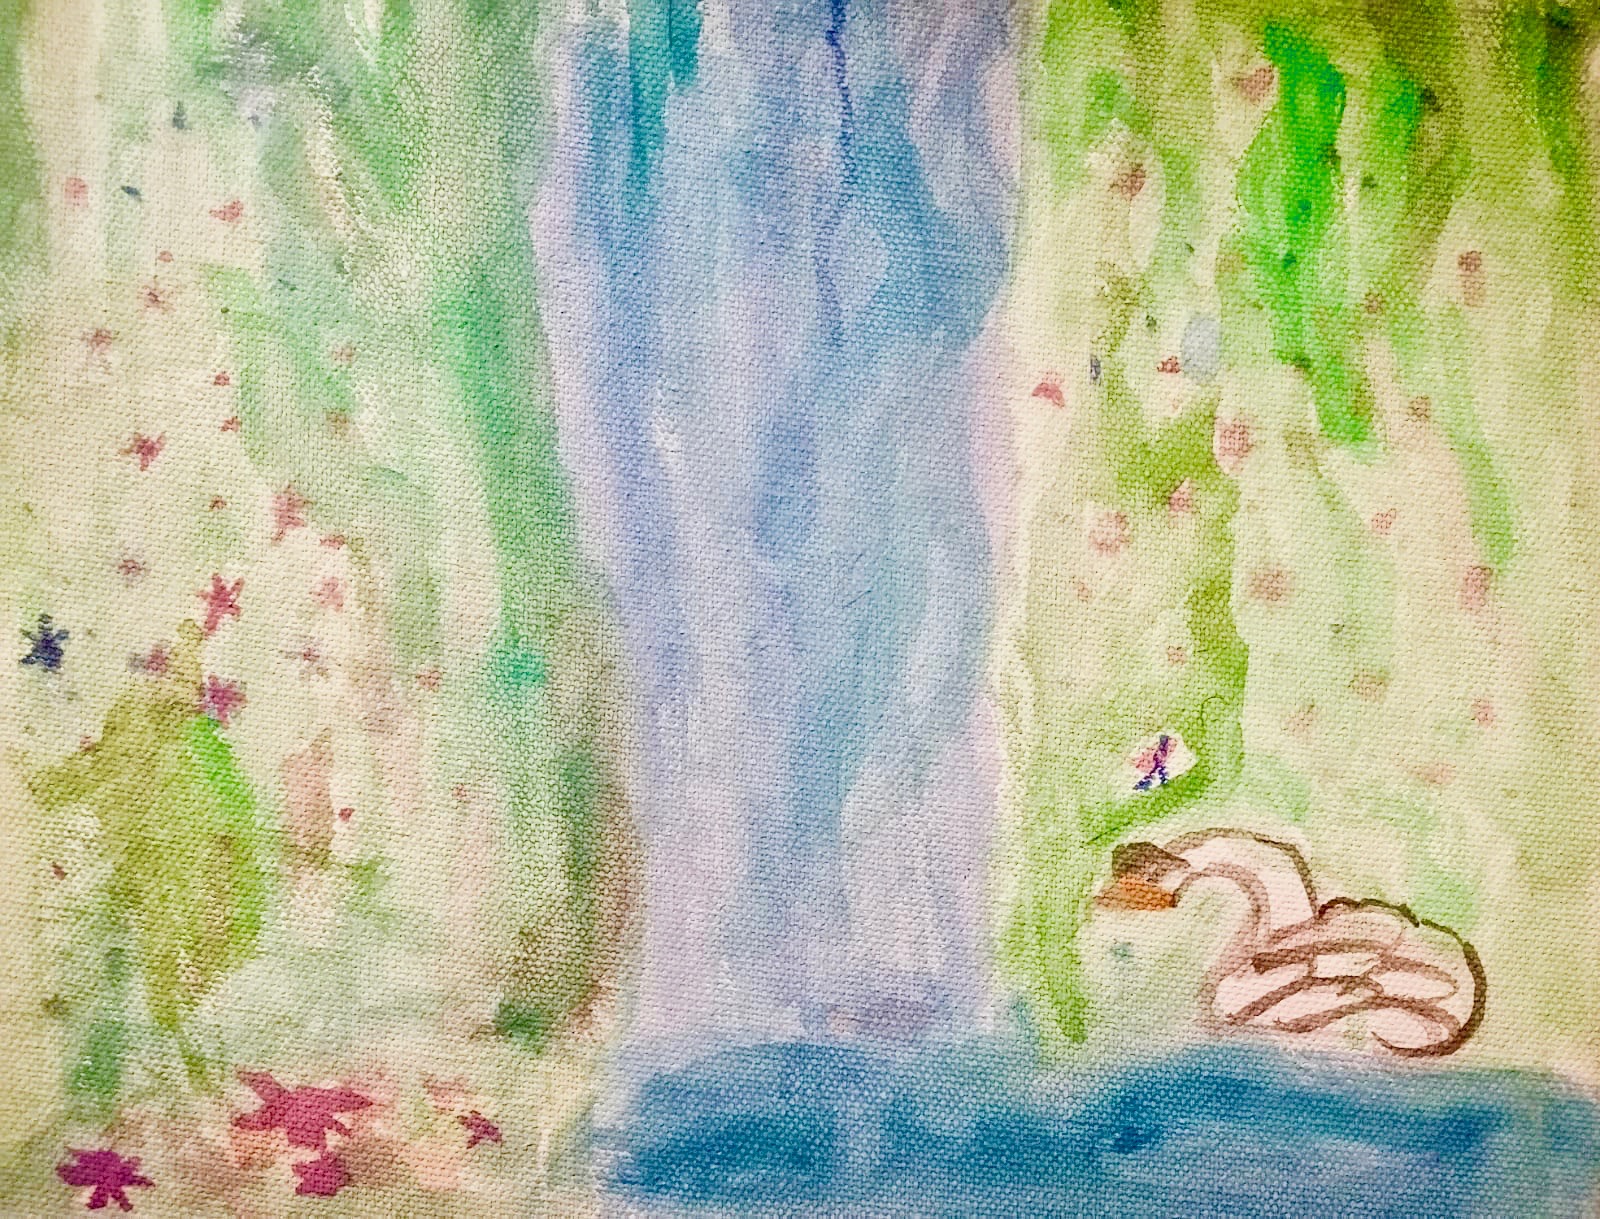 'A Curraghchase Walk' by Liliane (7) from Limerick